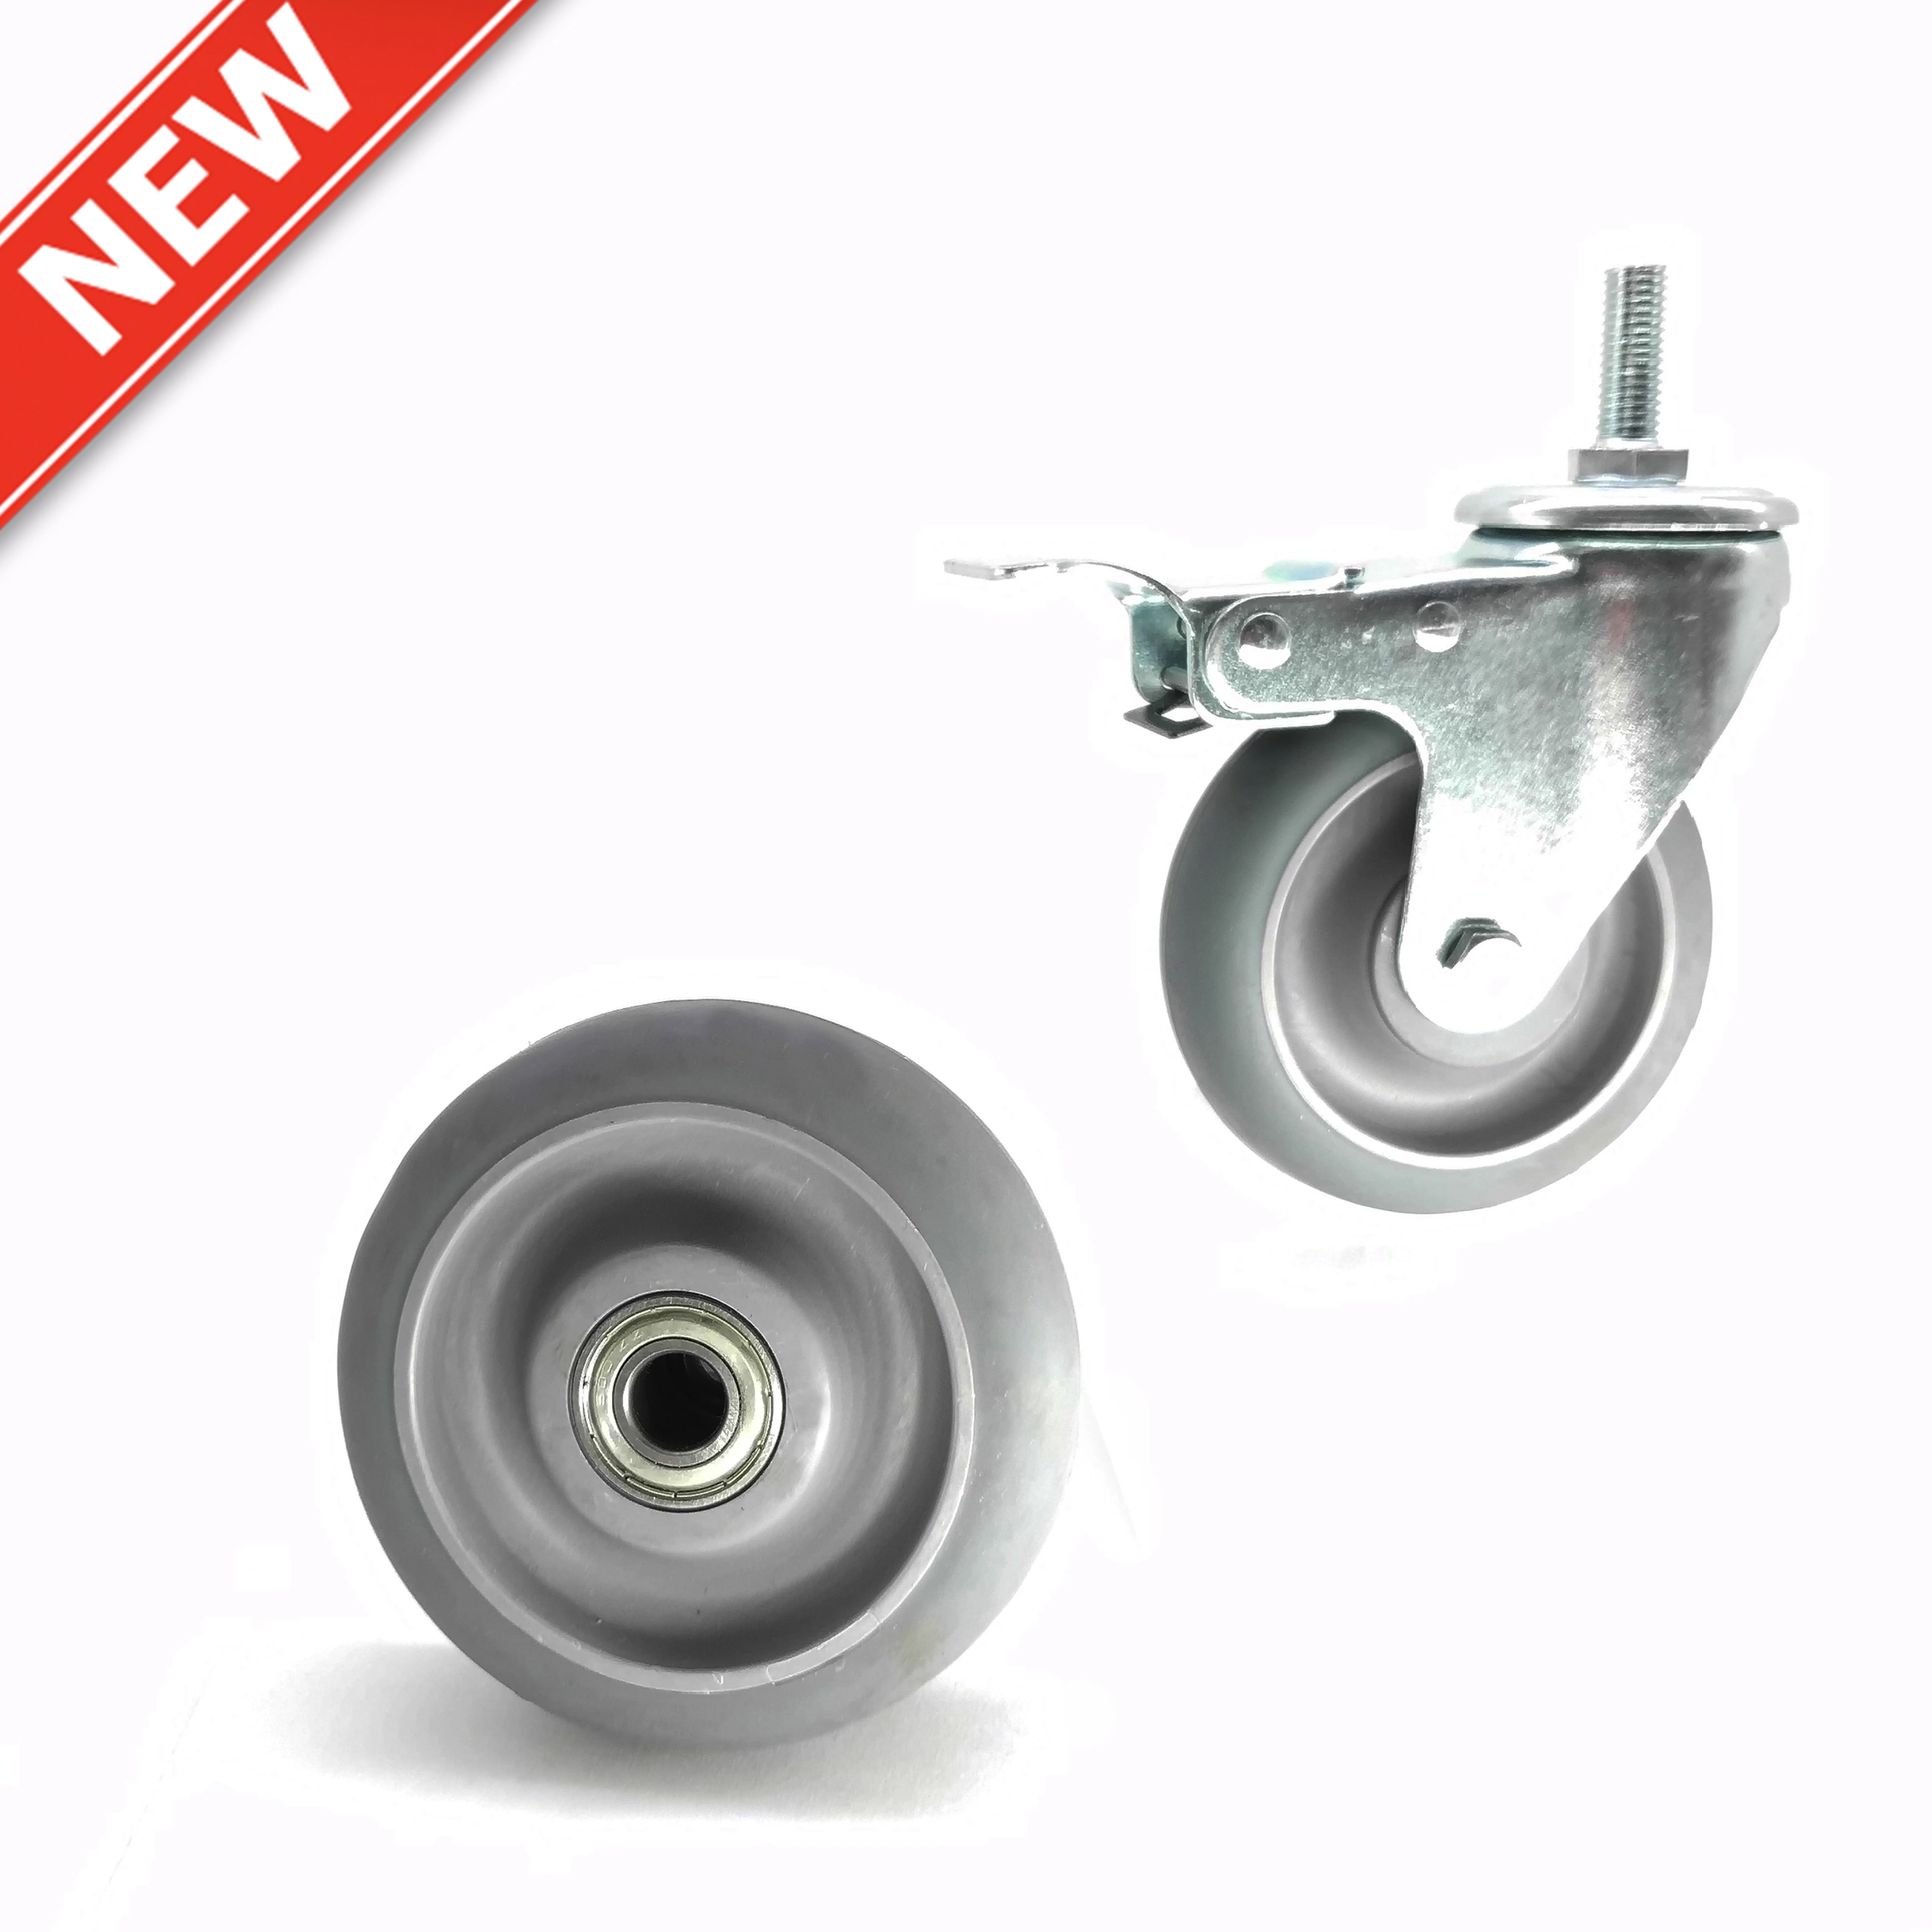 5'' mid-heavy duty fixed caster wheels with ball bearing casters